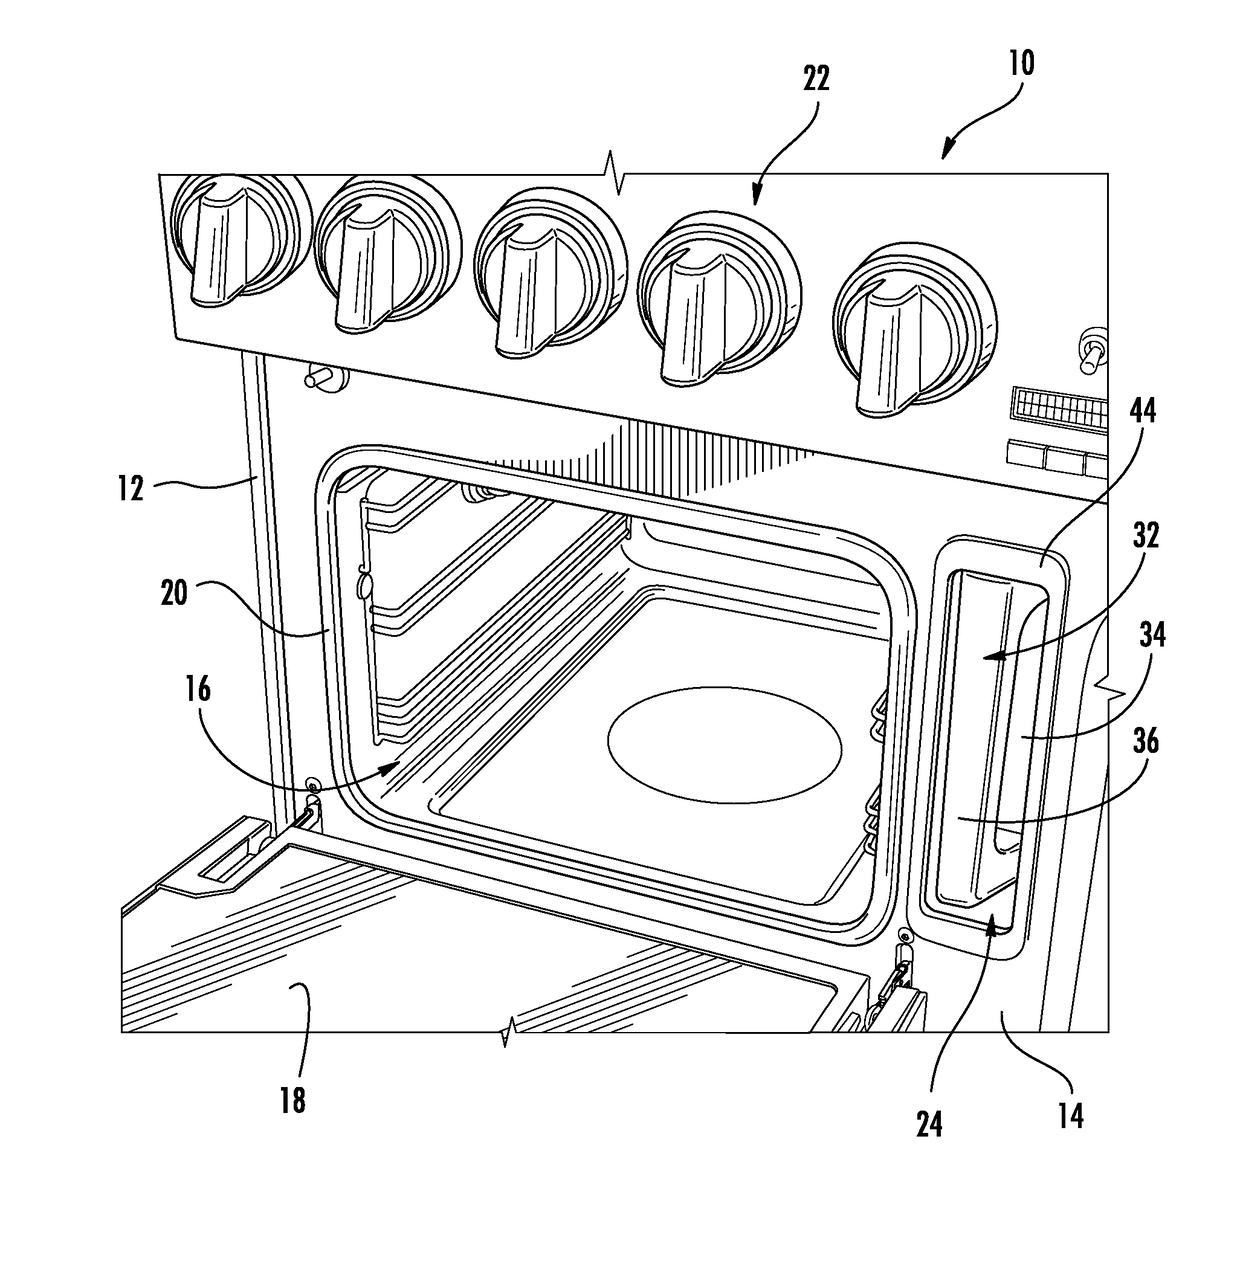 Home appliance with recessed water vessel housing